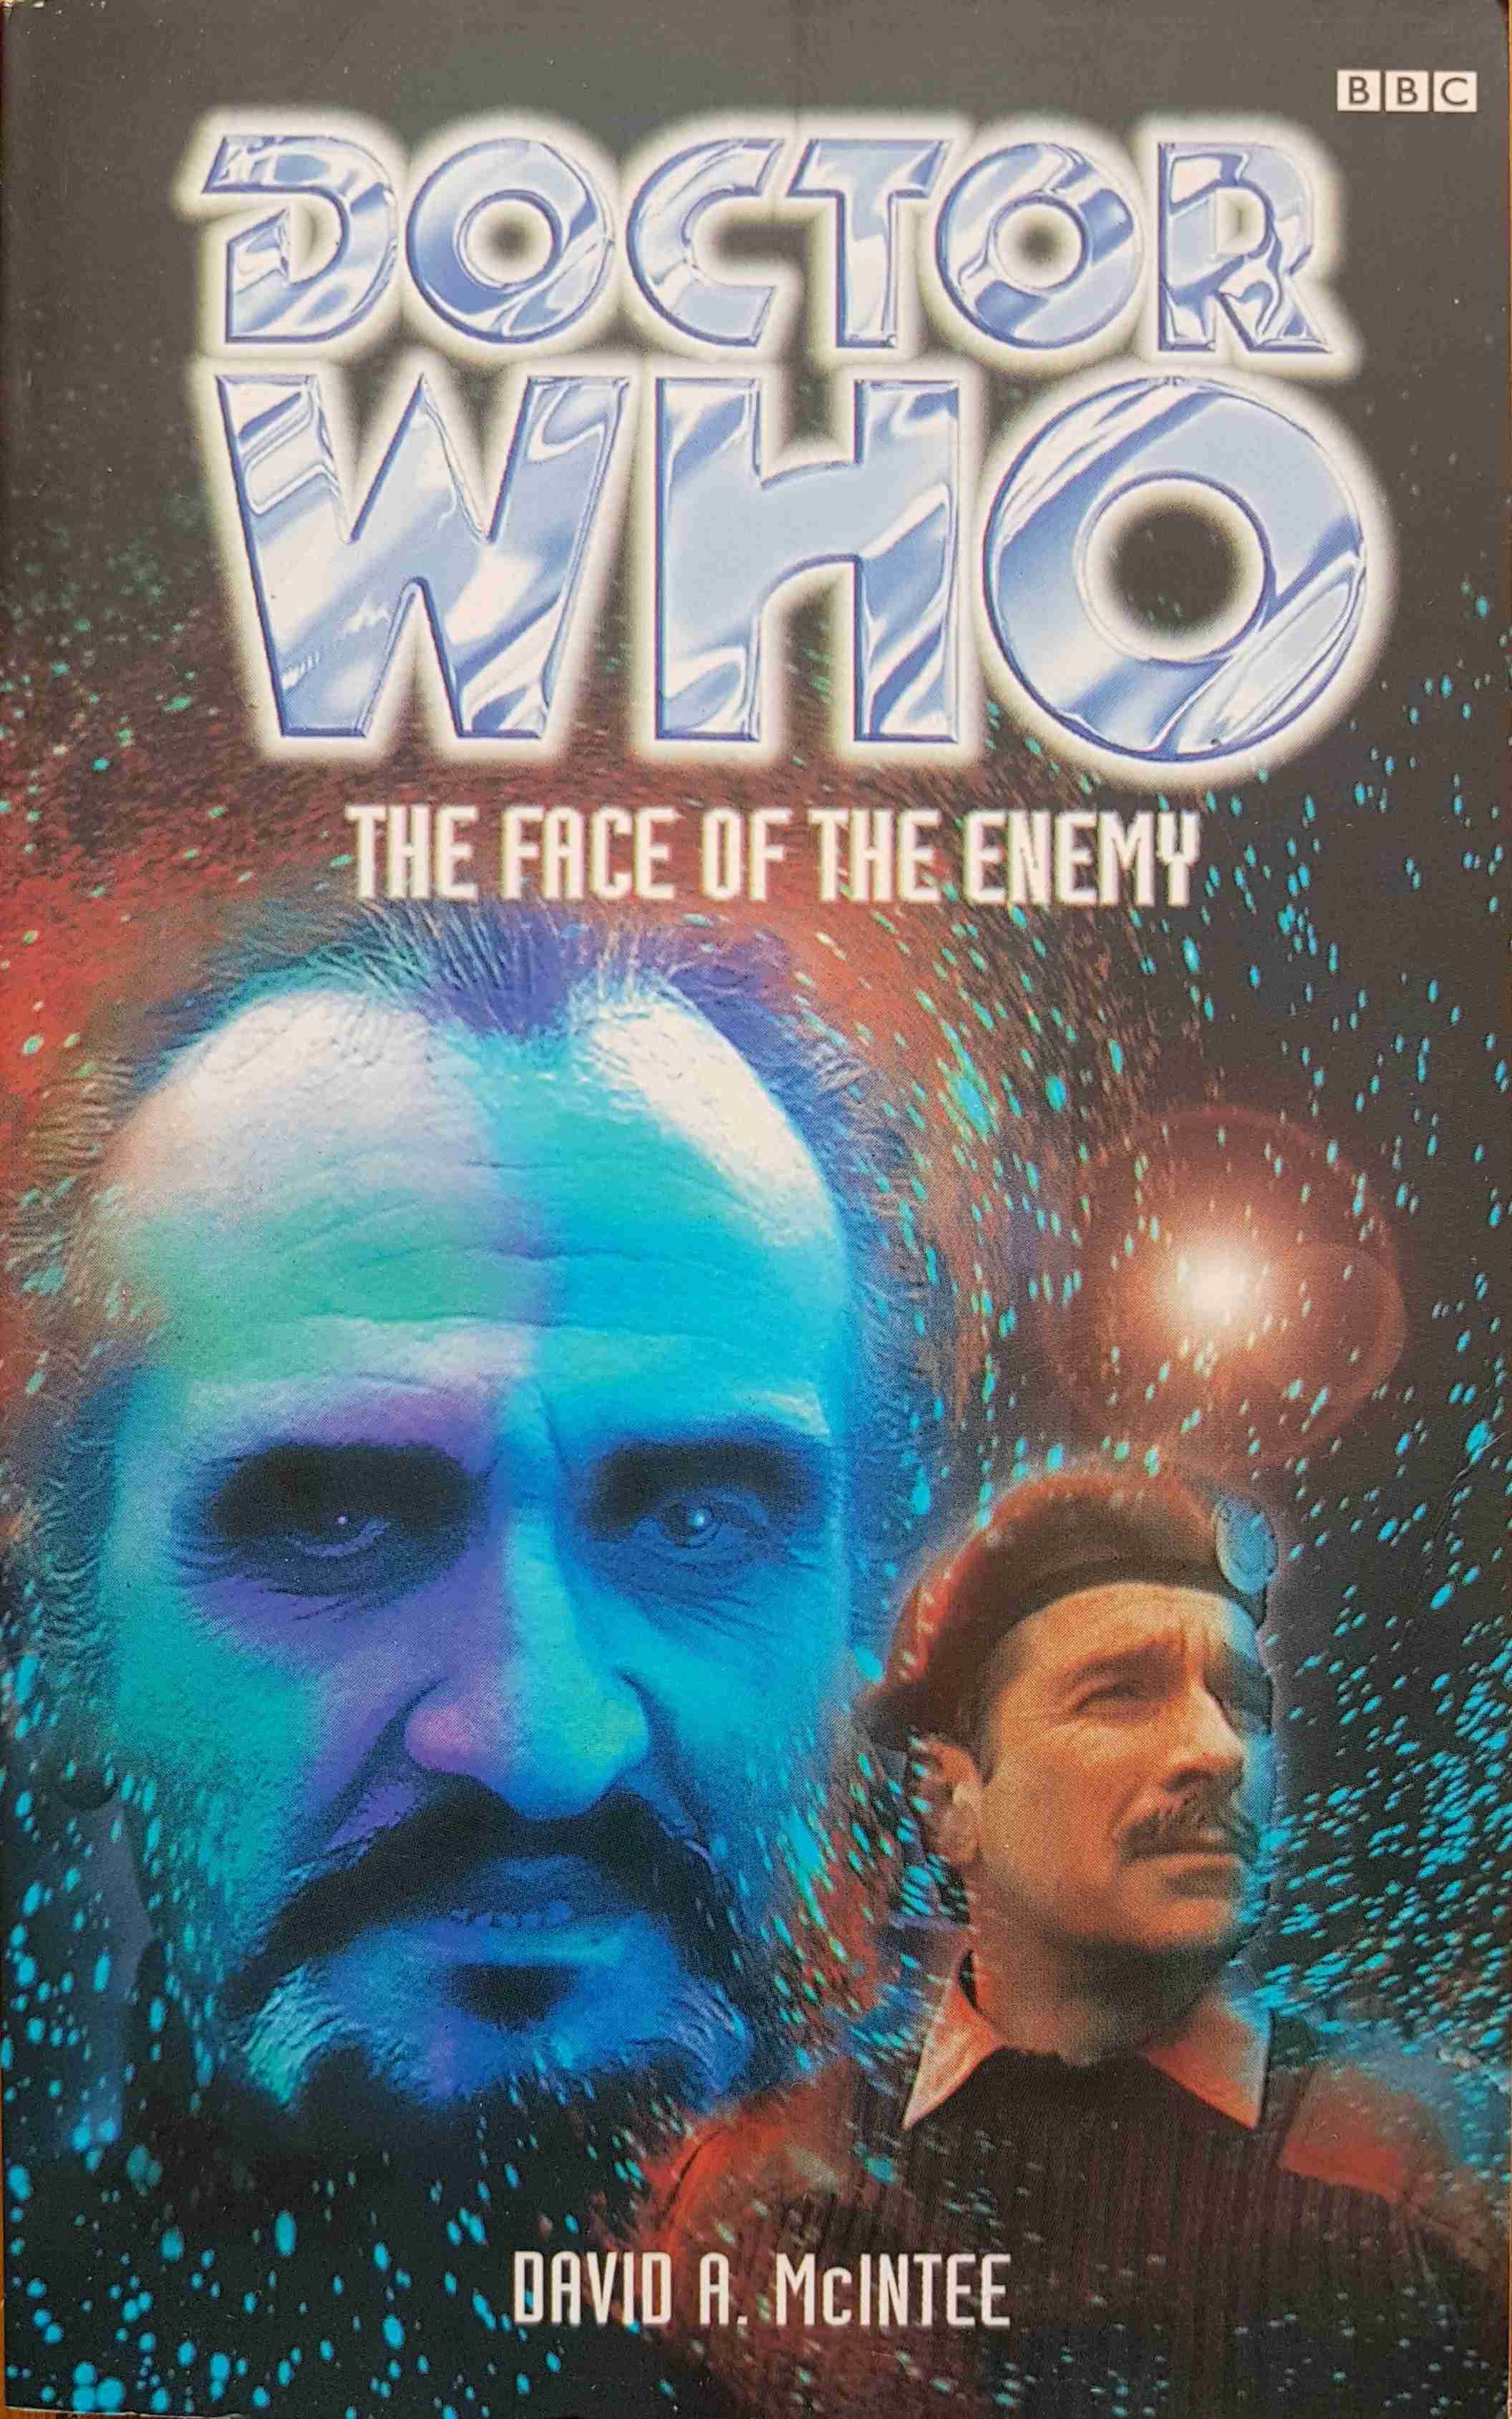 Picture of 0-563-40580-5 Doctor Who - The face of the enemy (Autographed) by artist David A. McIntee from the BBC books - Records and Tapes library